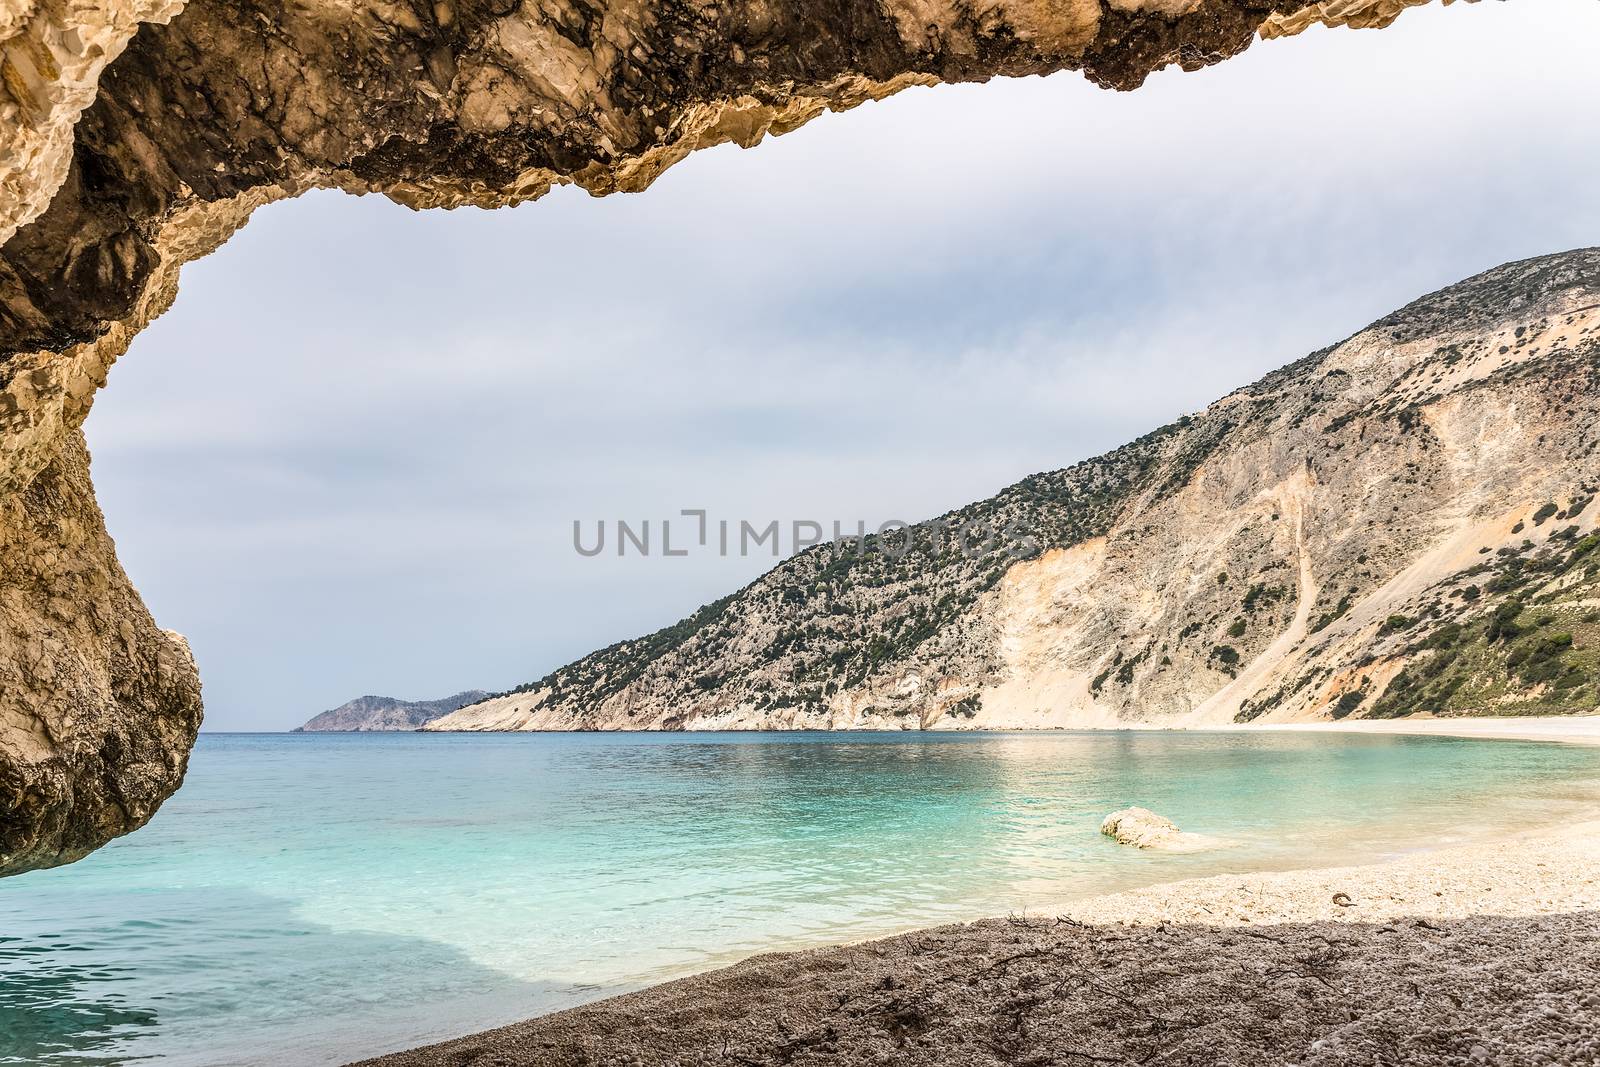 Cave outlook on sea mountain and beach by BenSchonewille